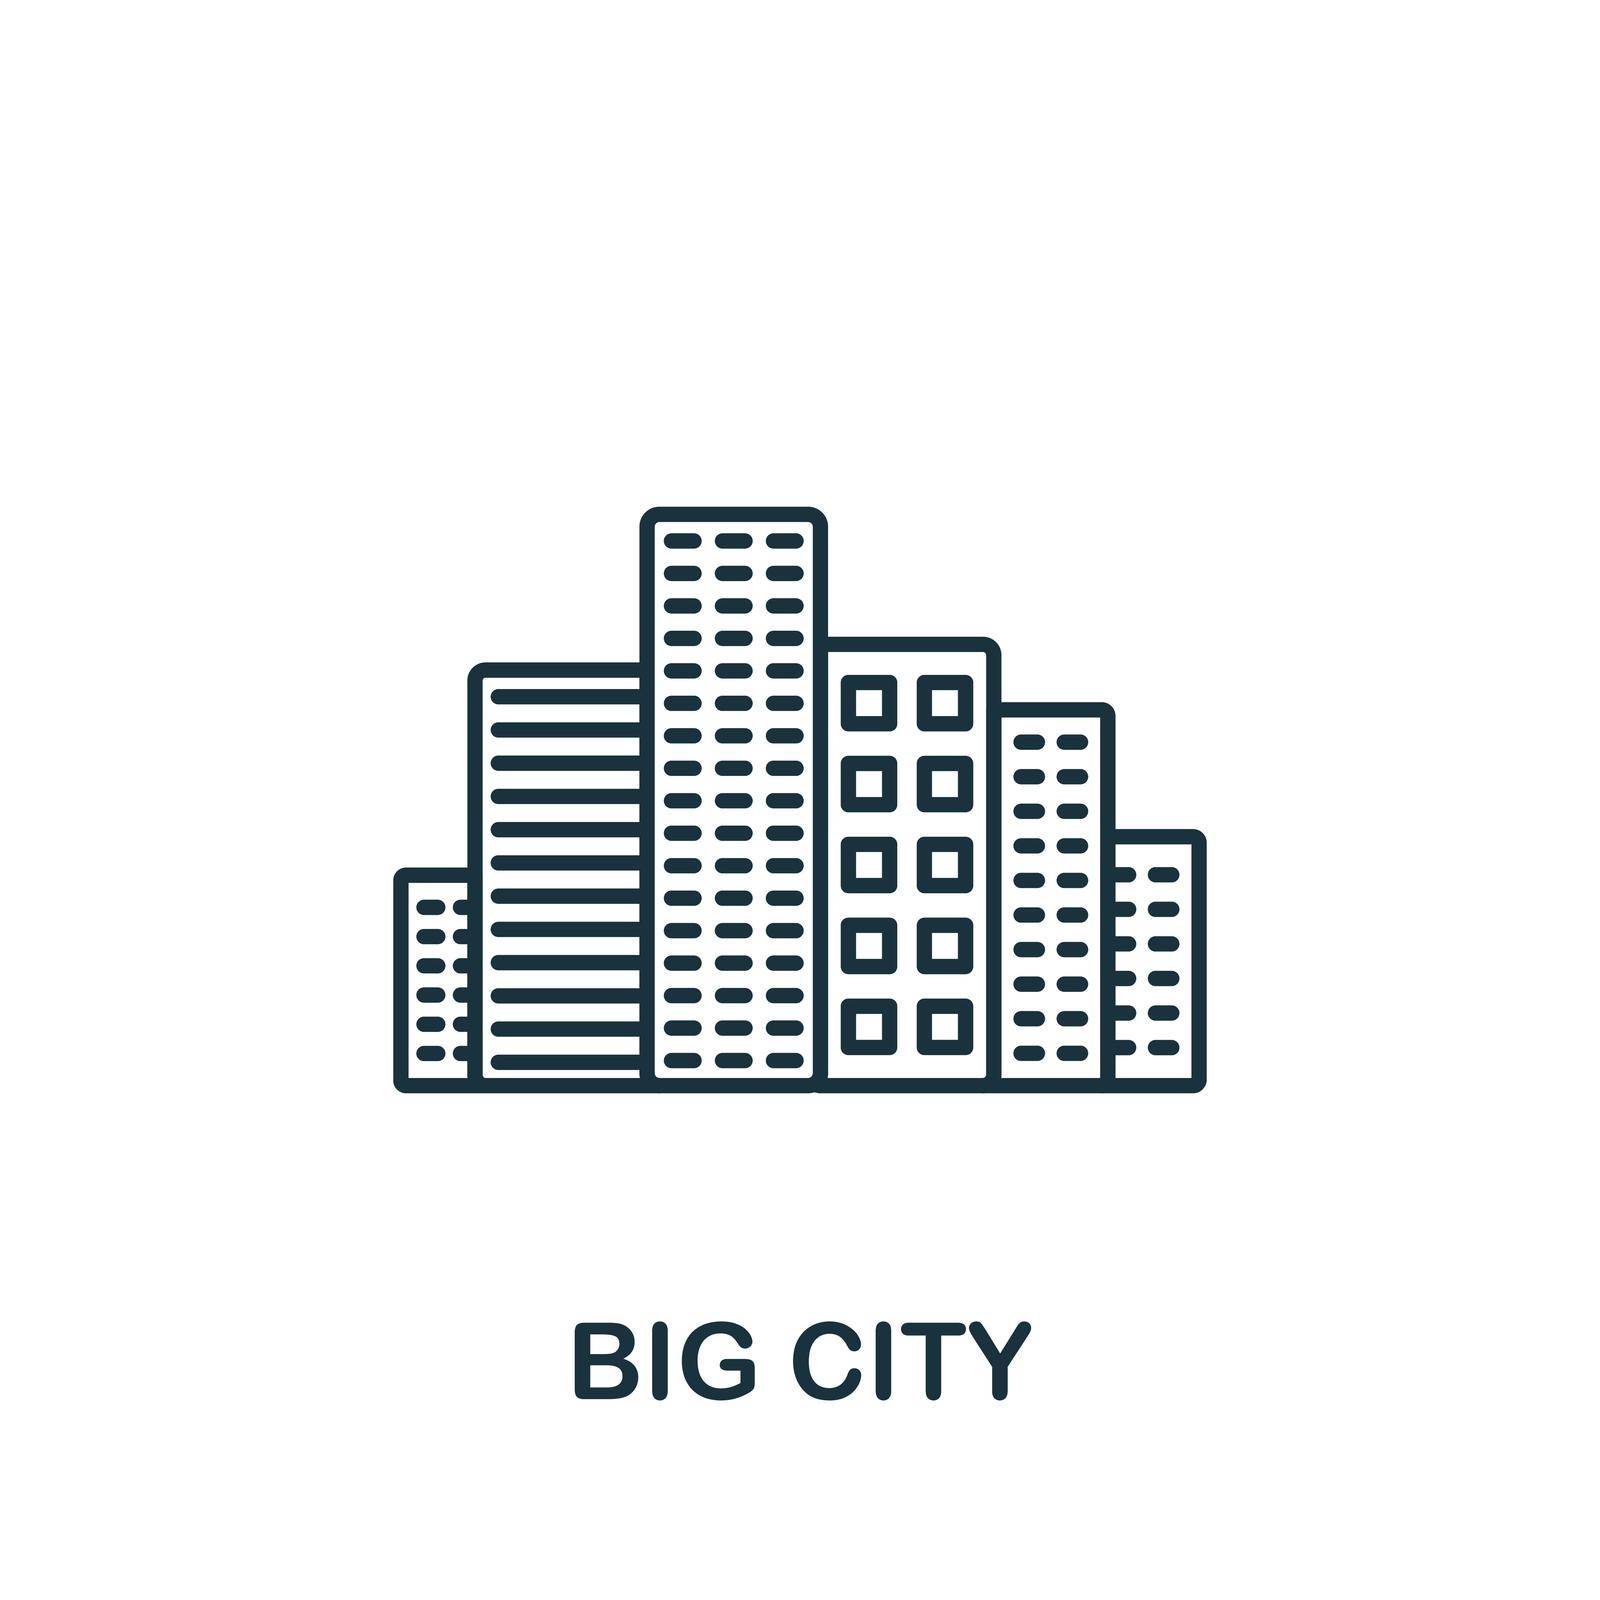 Big City icon. Simple line element symbol for templates, web design and infographics.